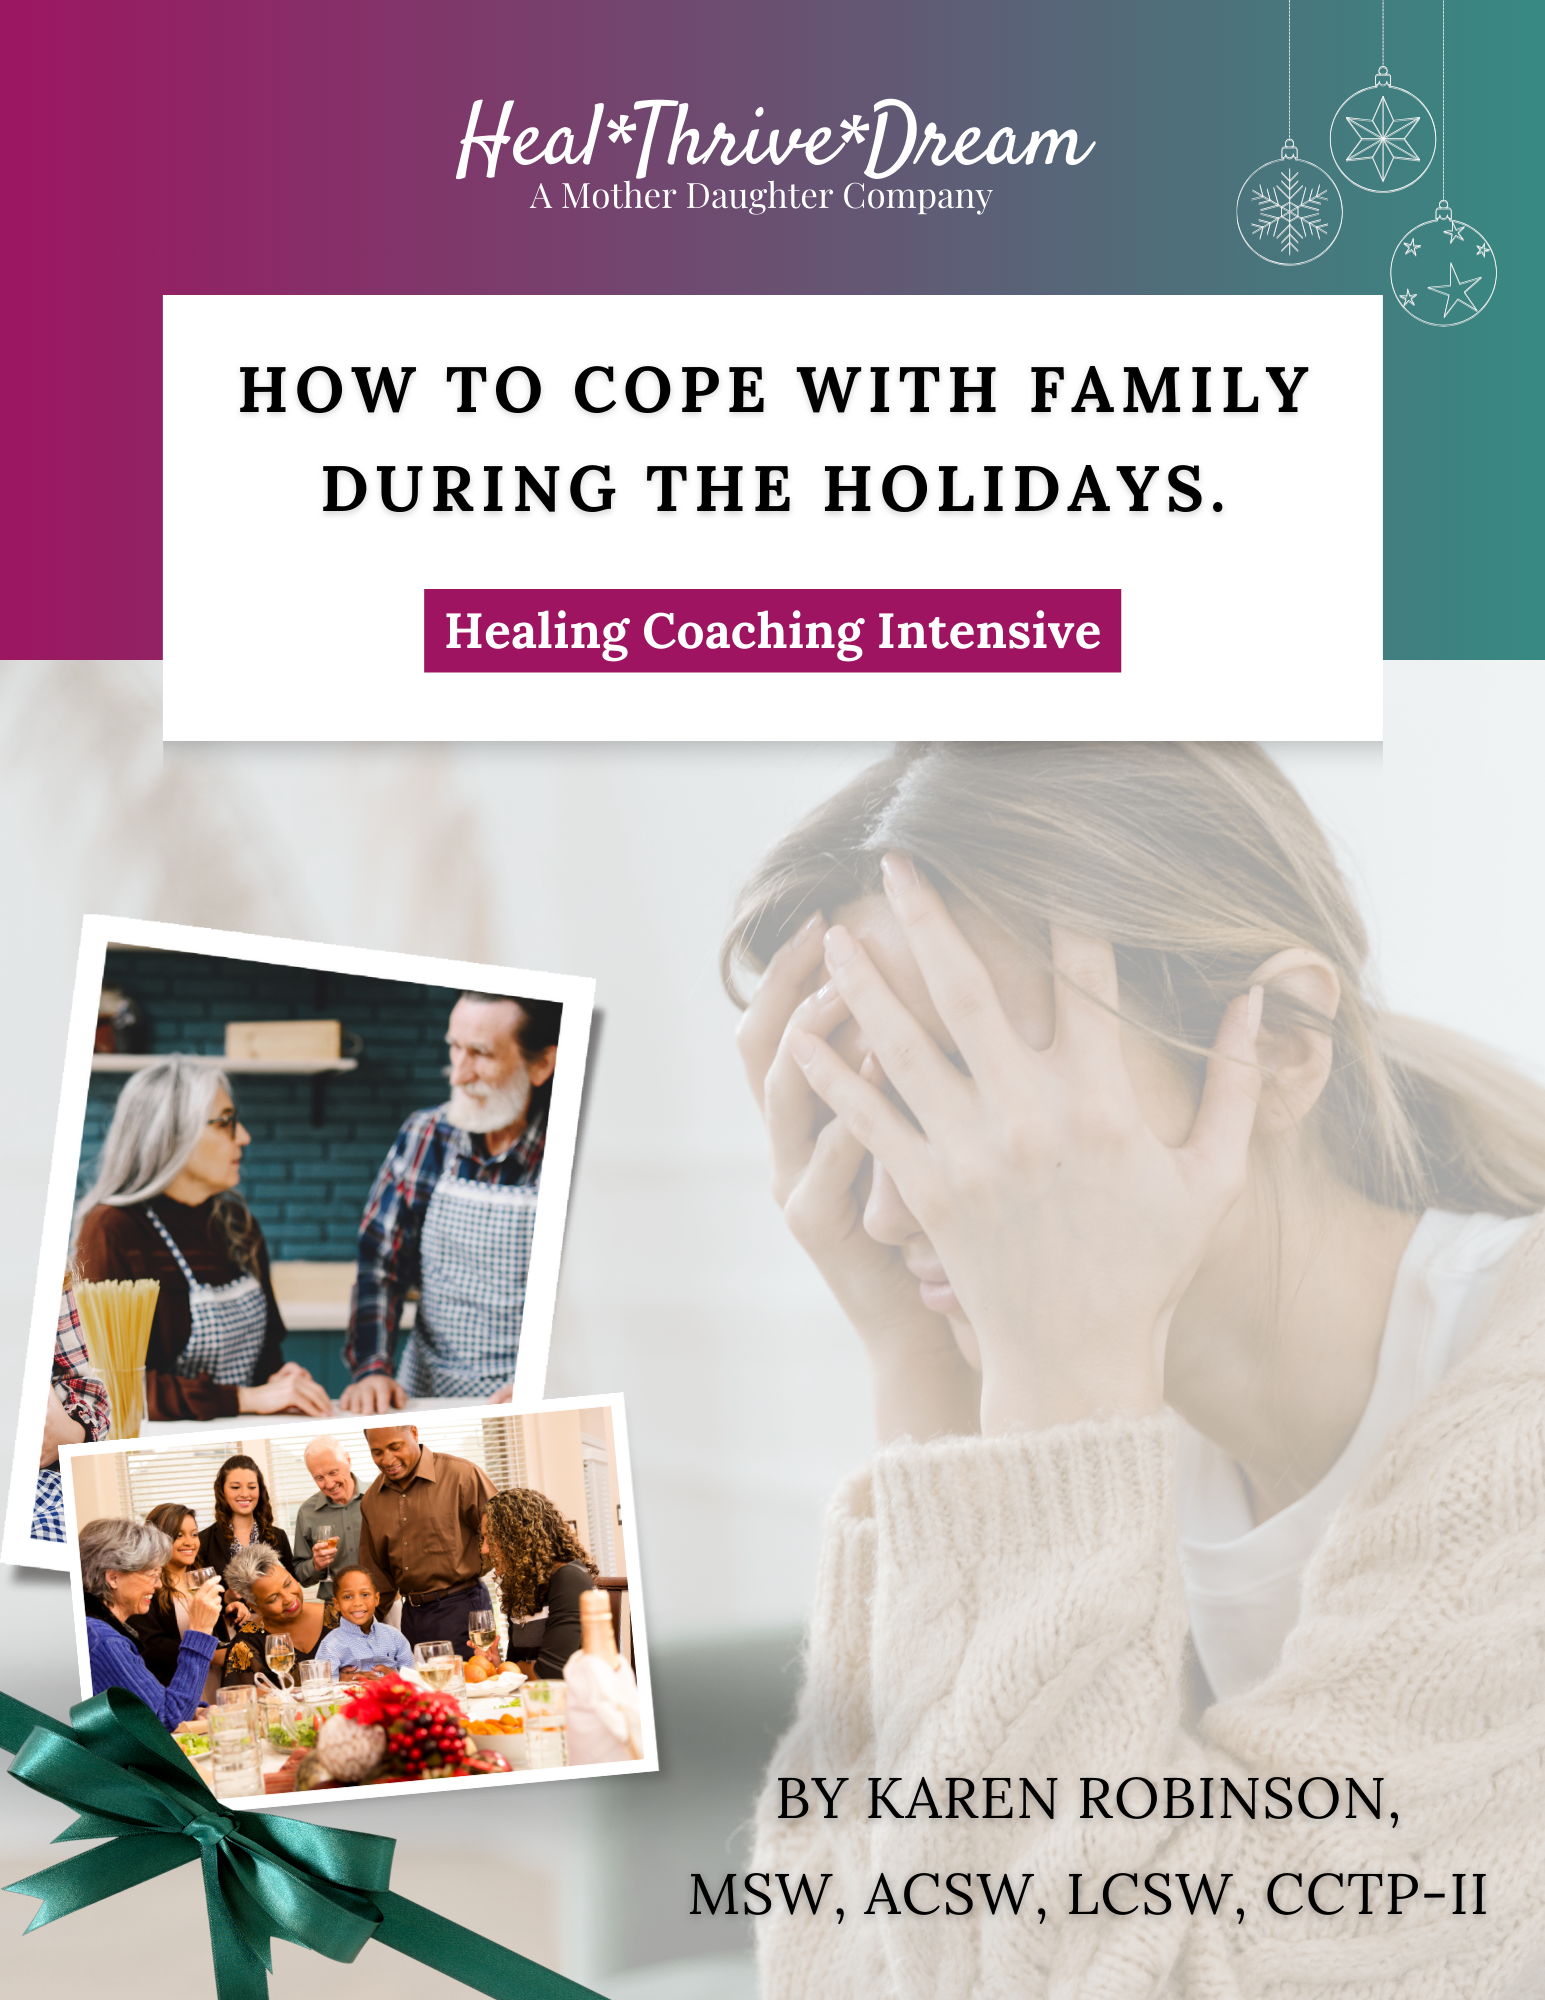 How to Cope with Family During the Holidays.